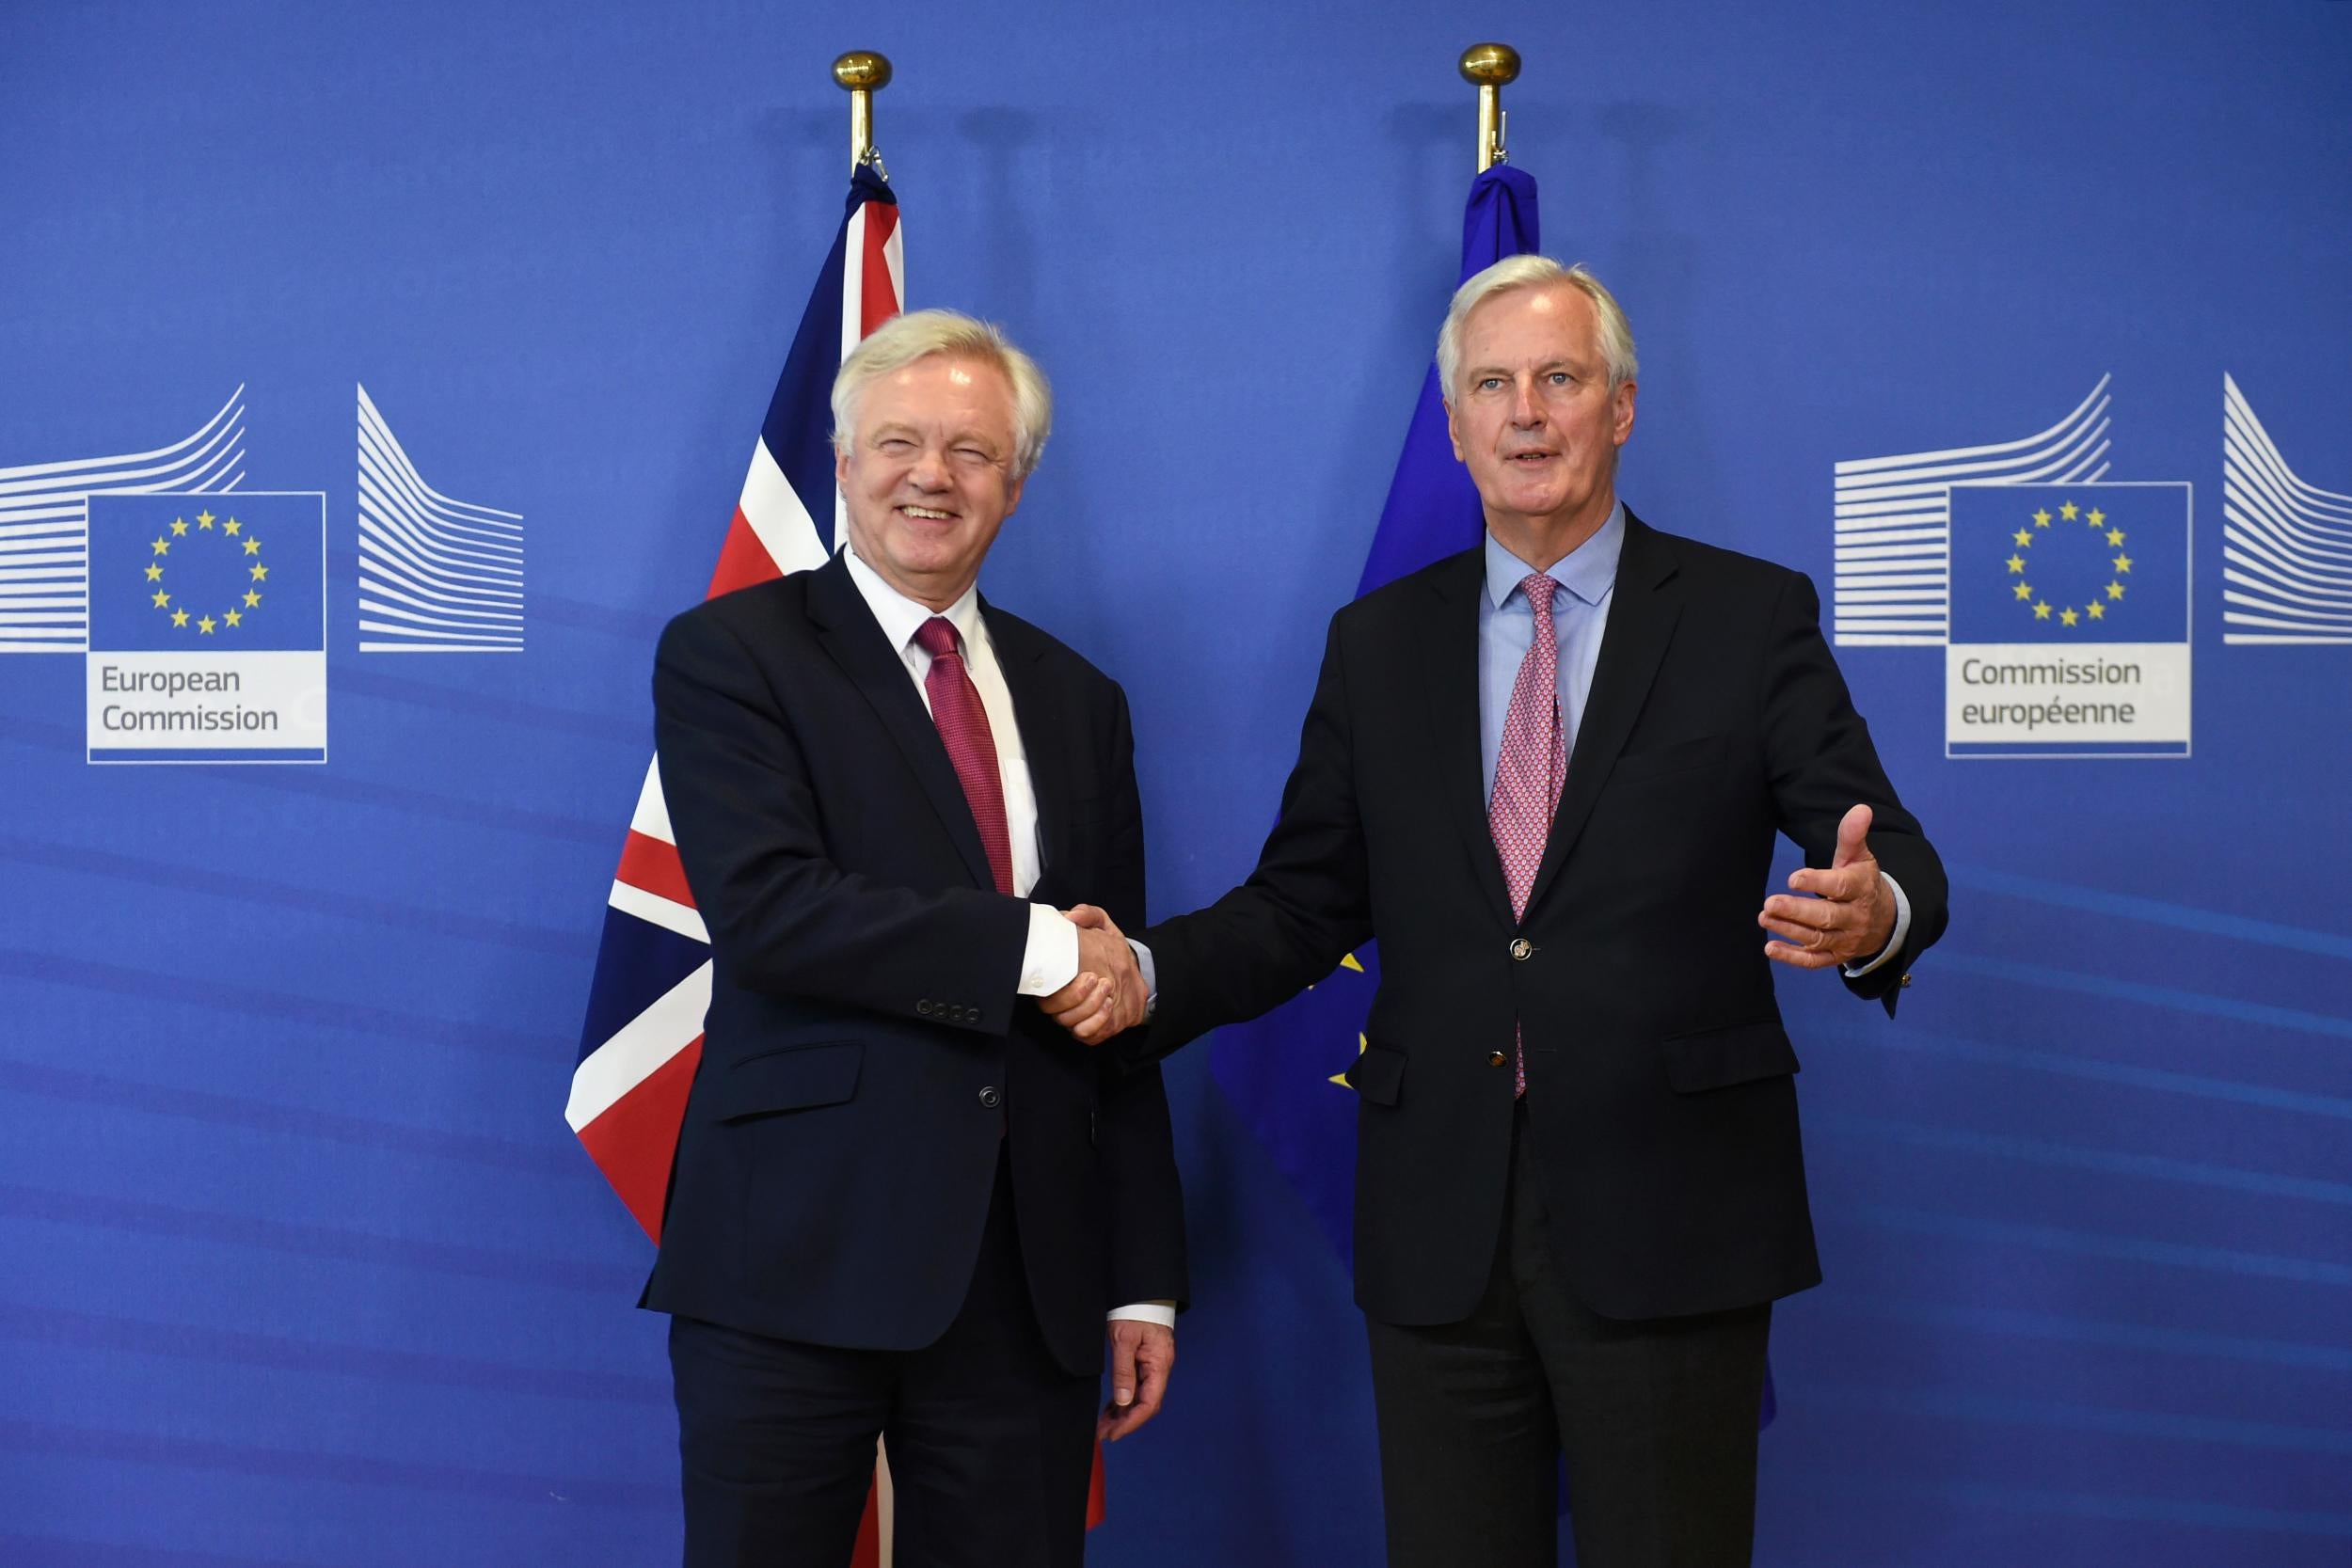 UK willing to do deal on European Court of Justice's influence after Brexit, says David Davis - The Independent